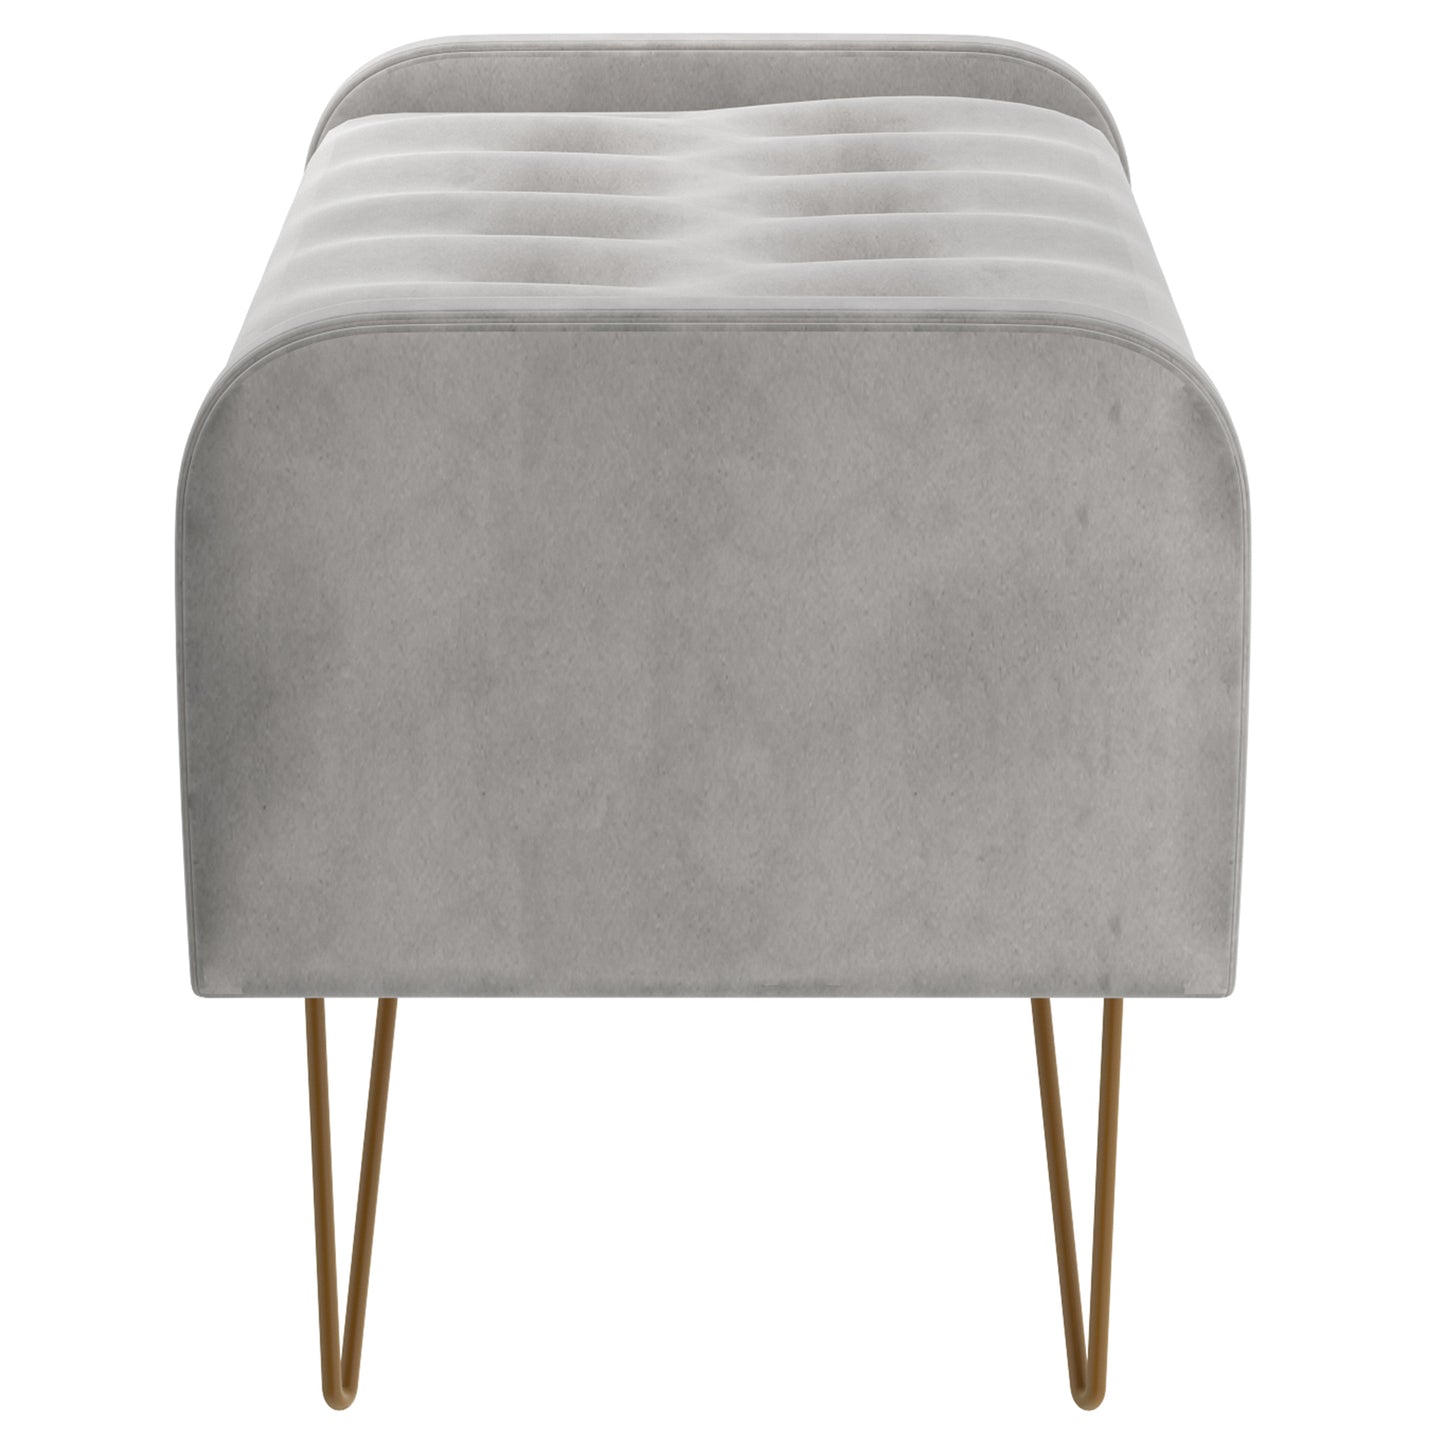 Sabel Storage Ottoman/Bench in Grey and Aged Gold